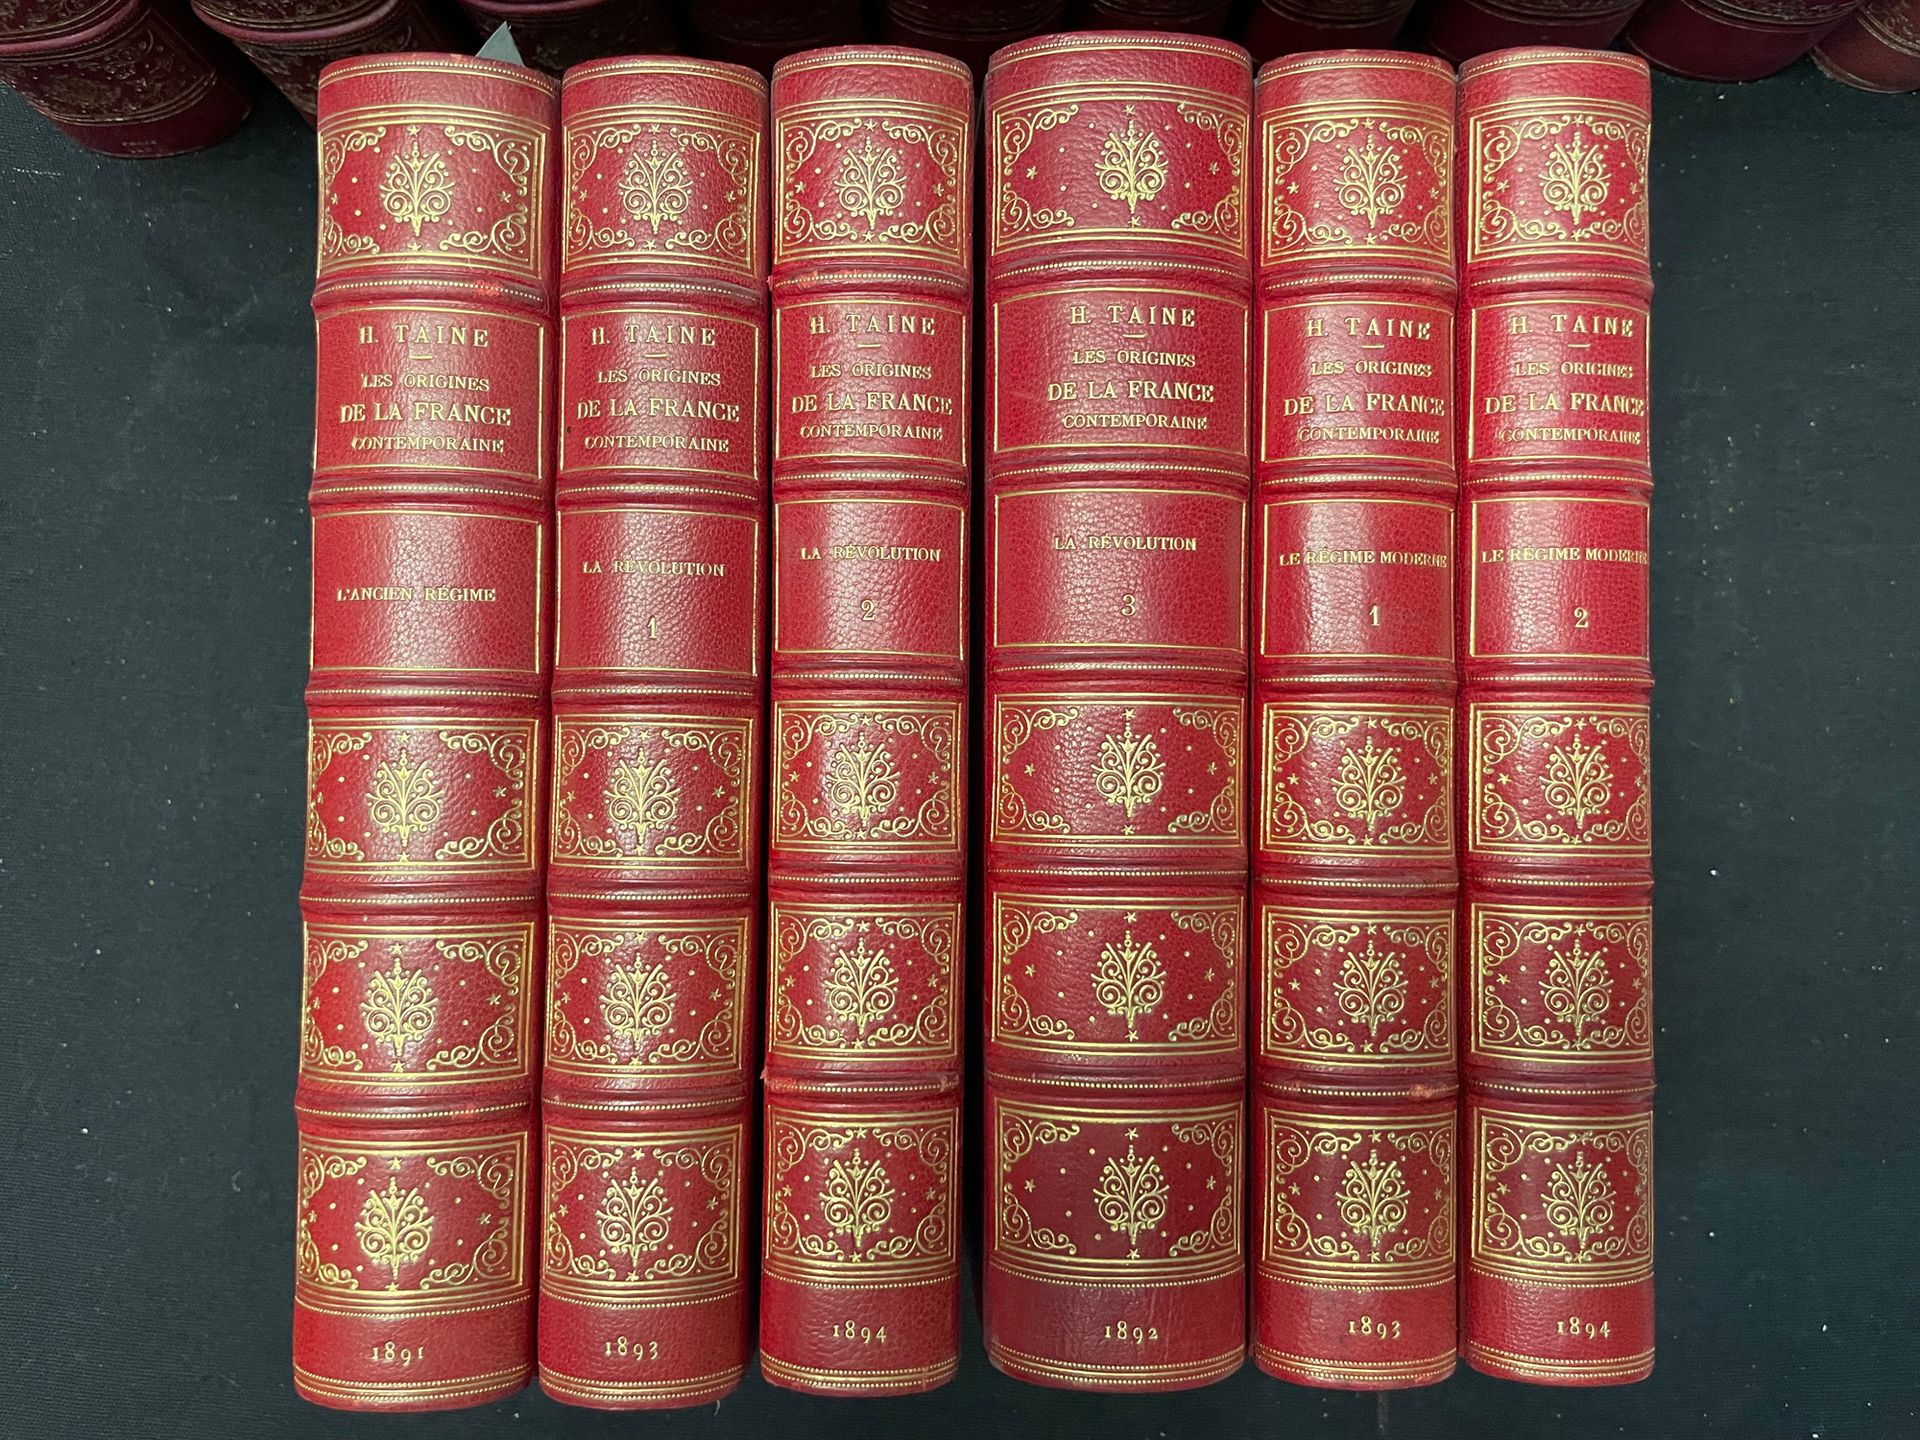 TAINE The origins of contemporary France.
6 volumes
As is